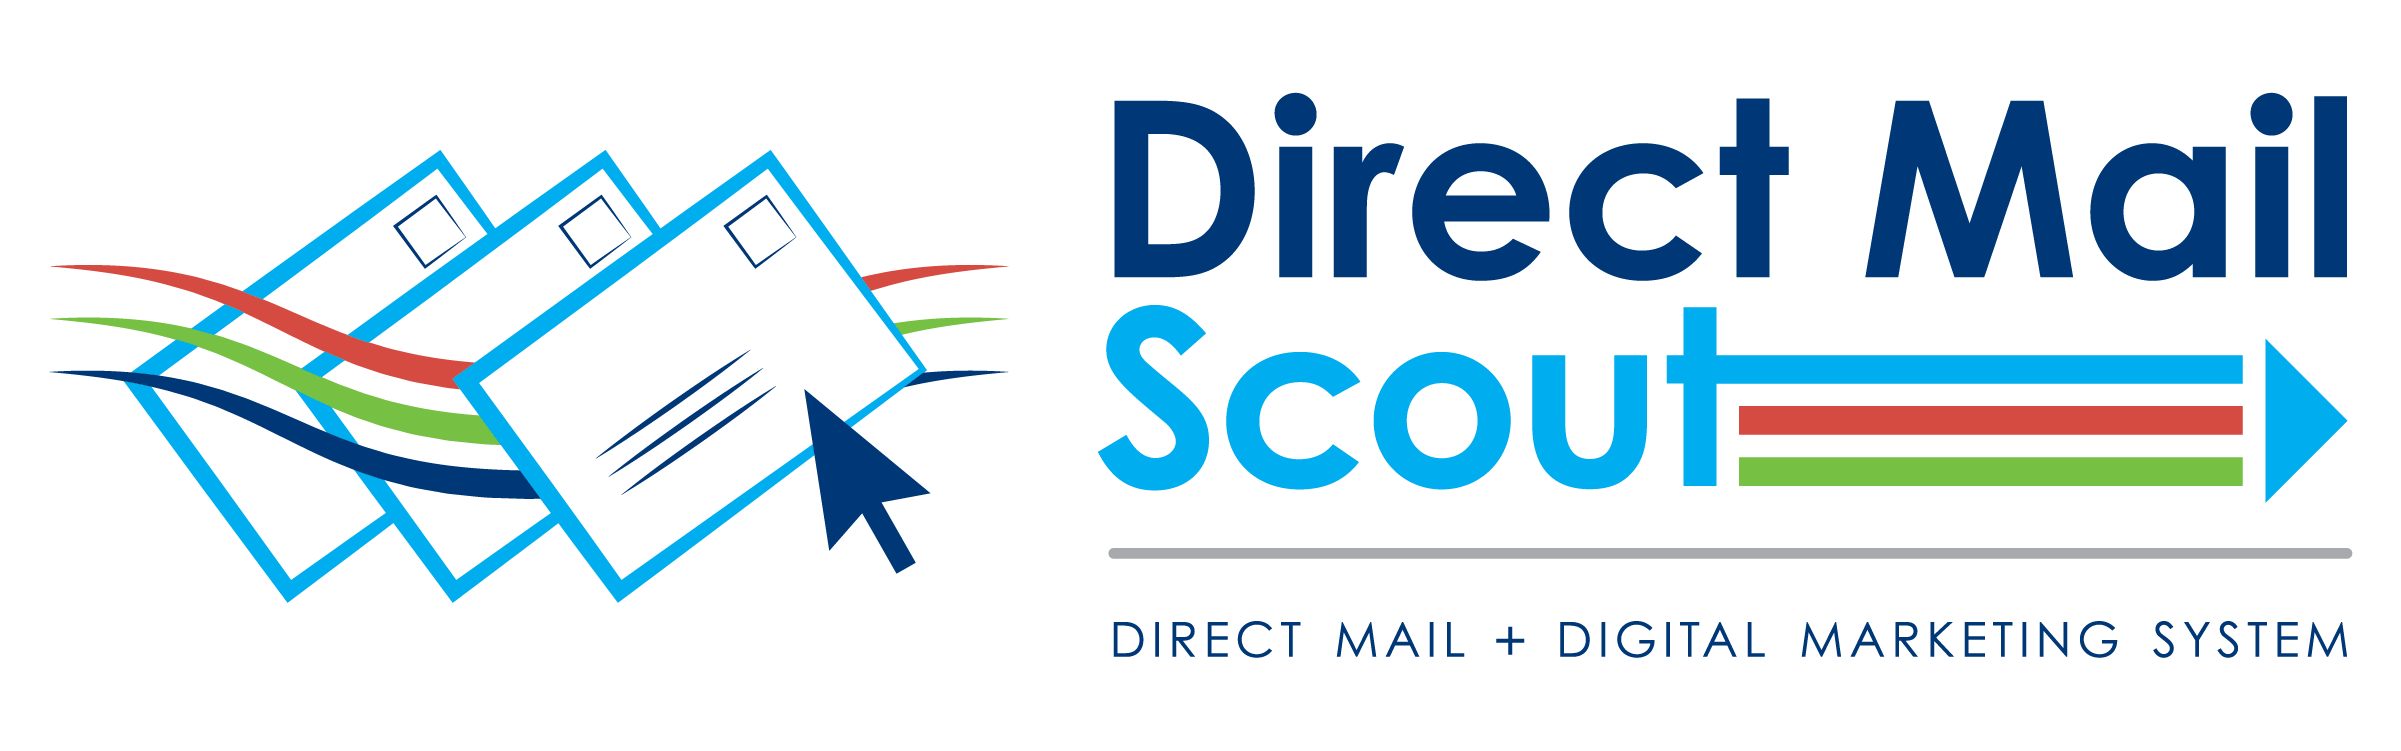 Direct Mail Scout logo